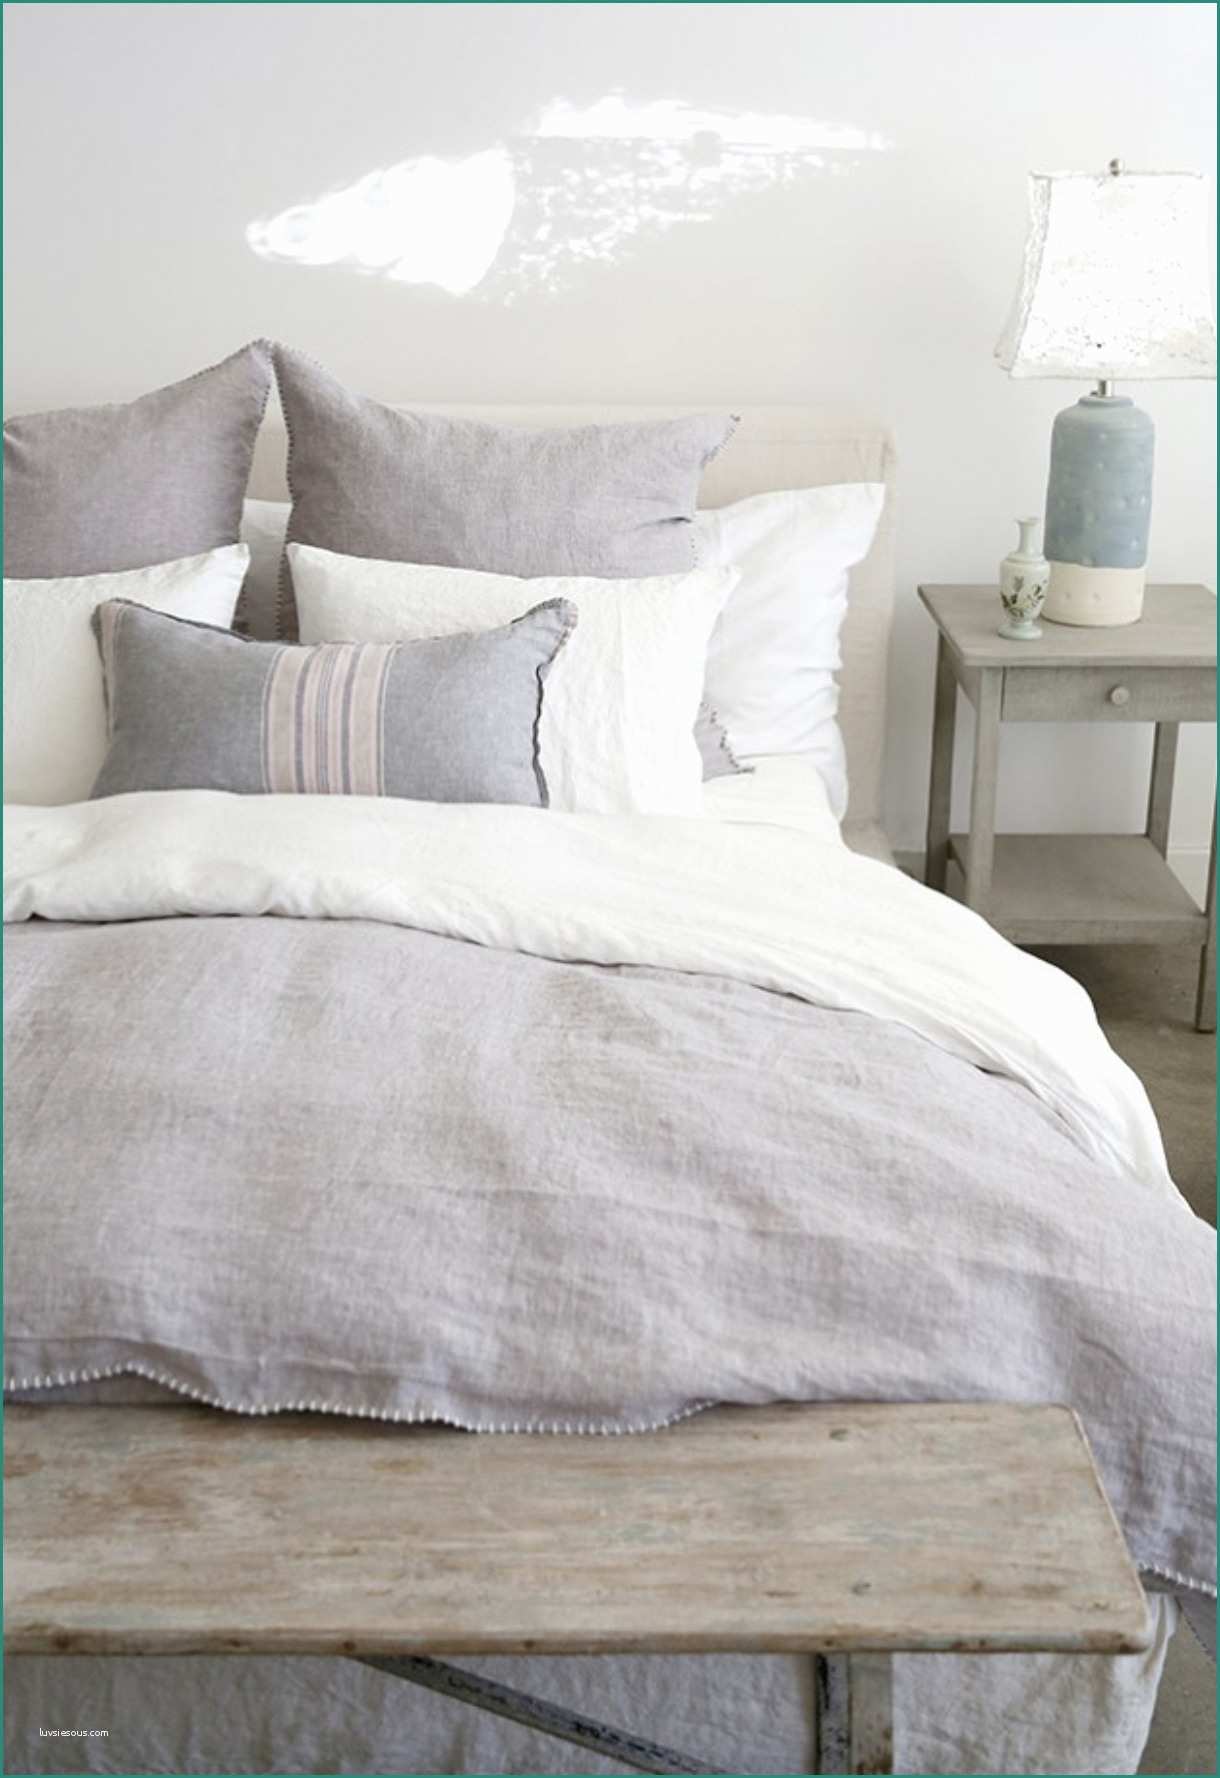 Camere Da Letto Outlet E Layers Of Linen On Shabbychic Rachelashwell